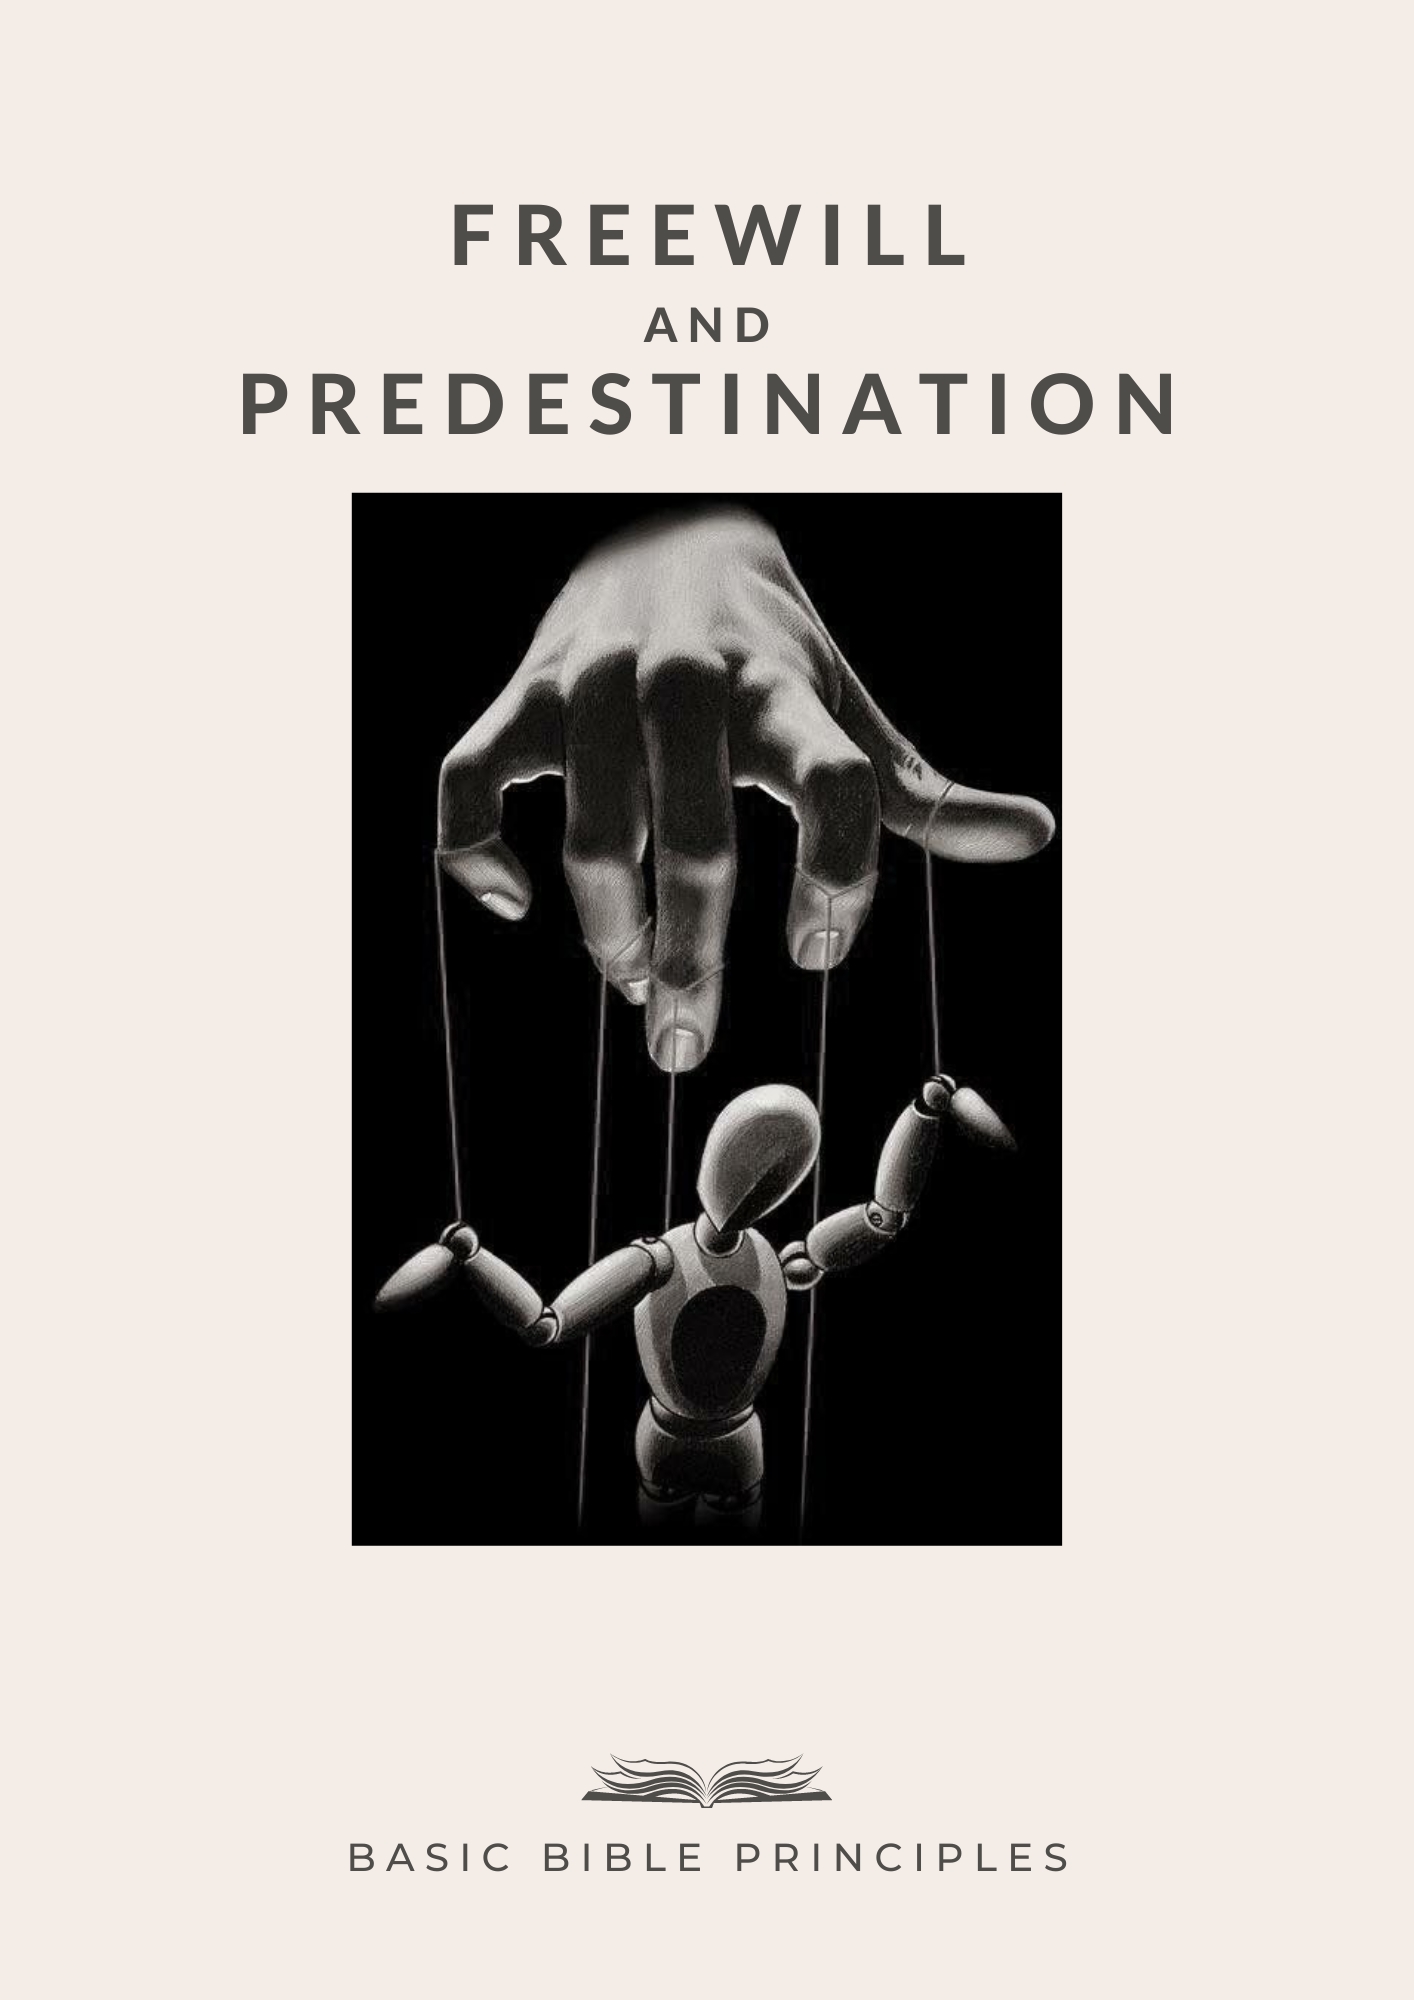 Basic Bible Principles: FREE WILL AND PREDESTINATION